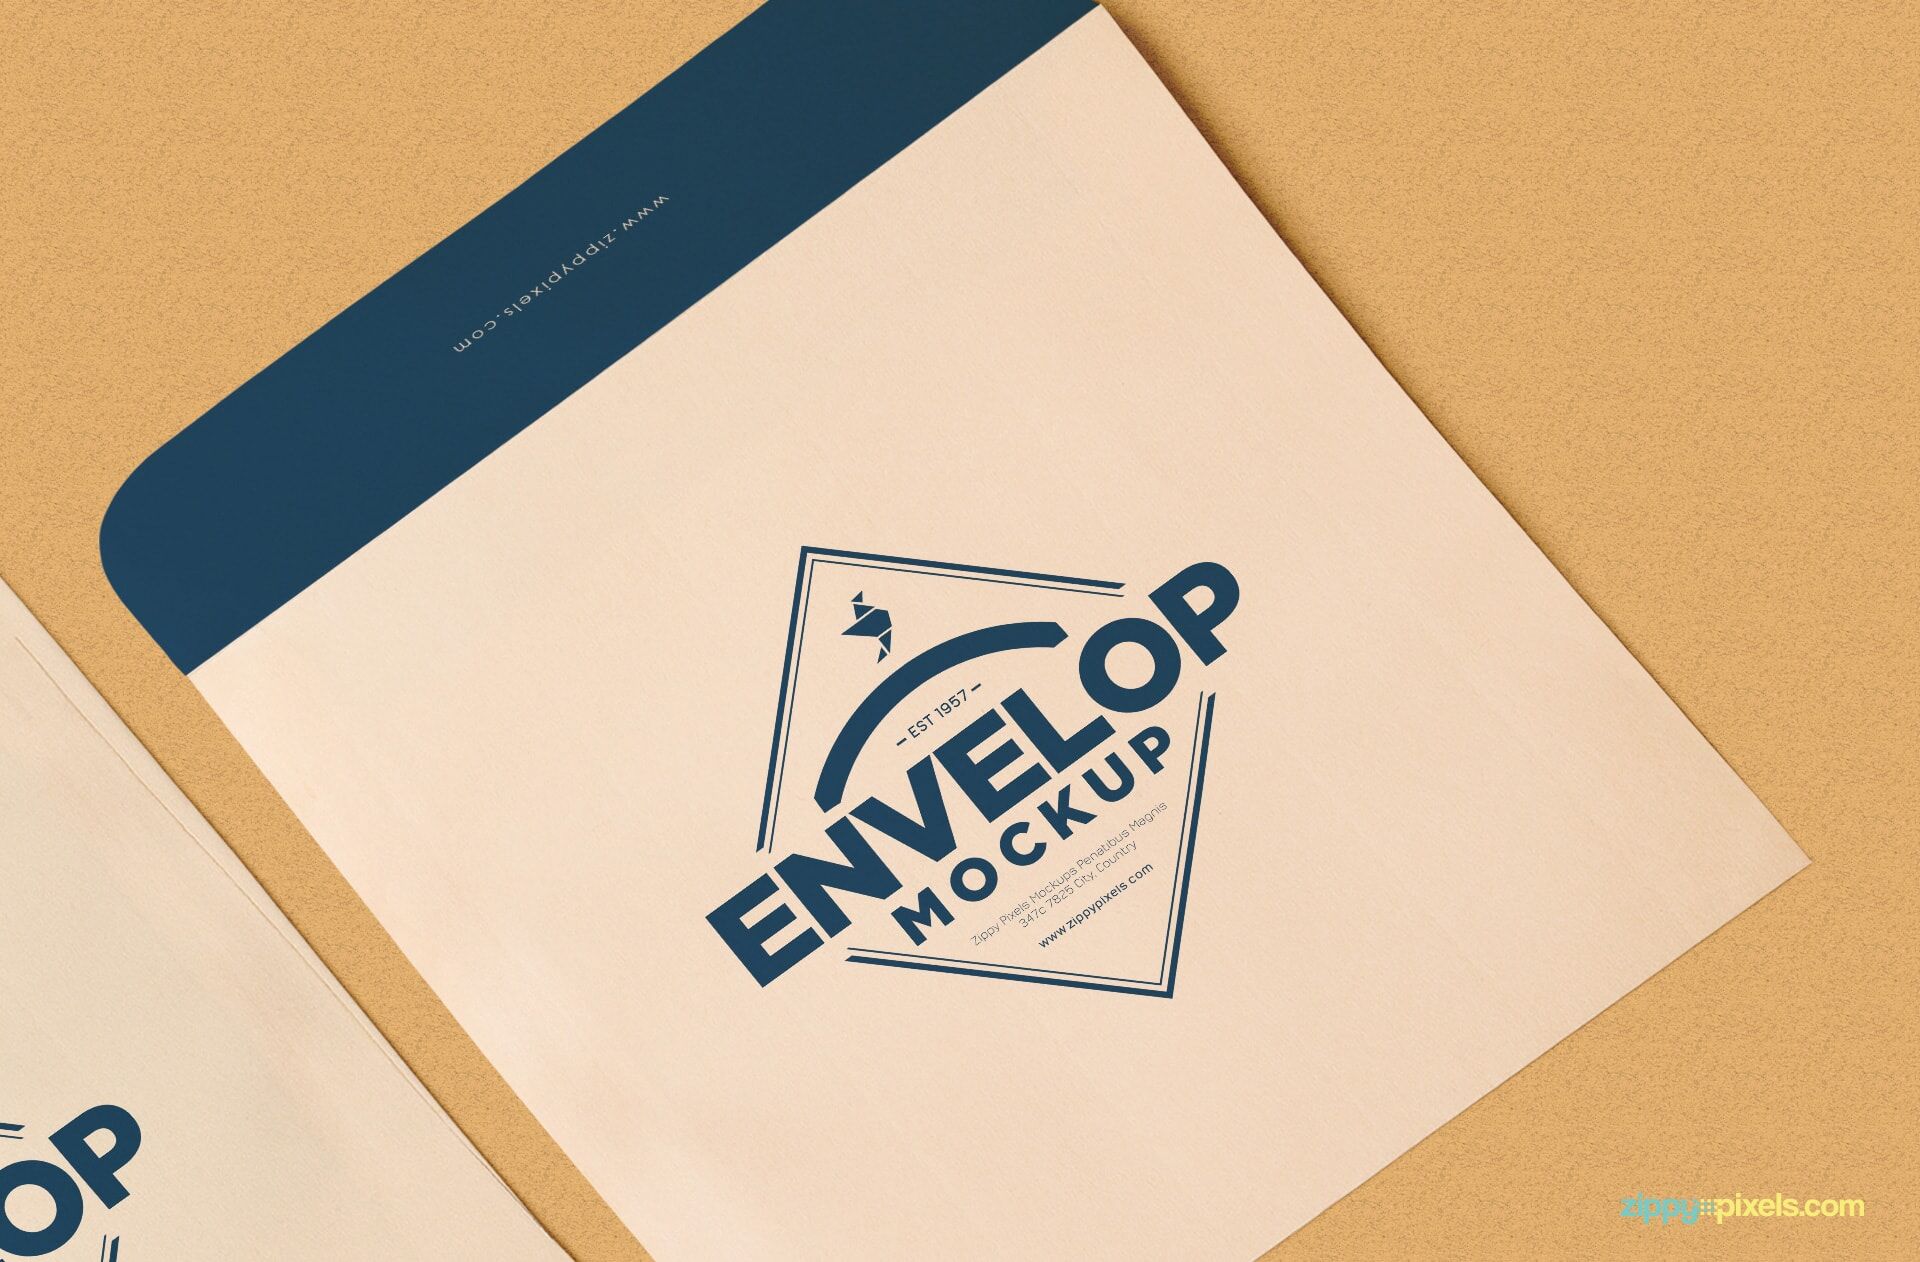 Squared Shaped Envelope Mockup With Letterhead FREE PSD